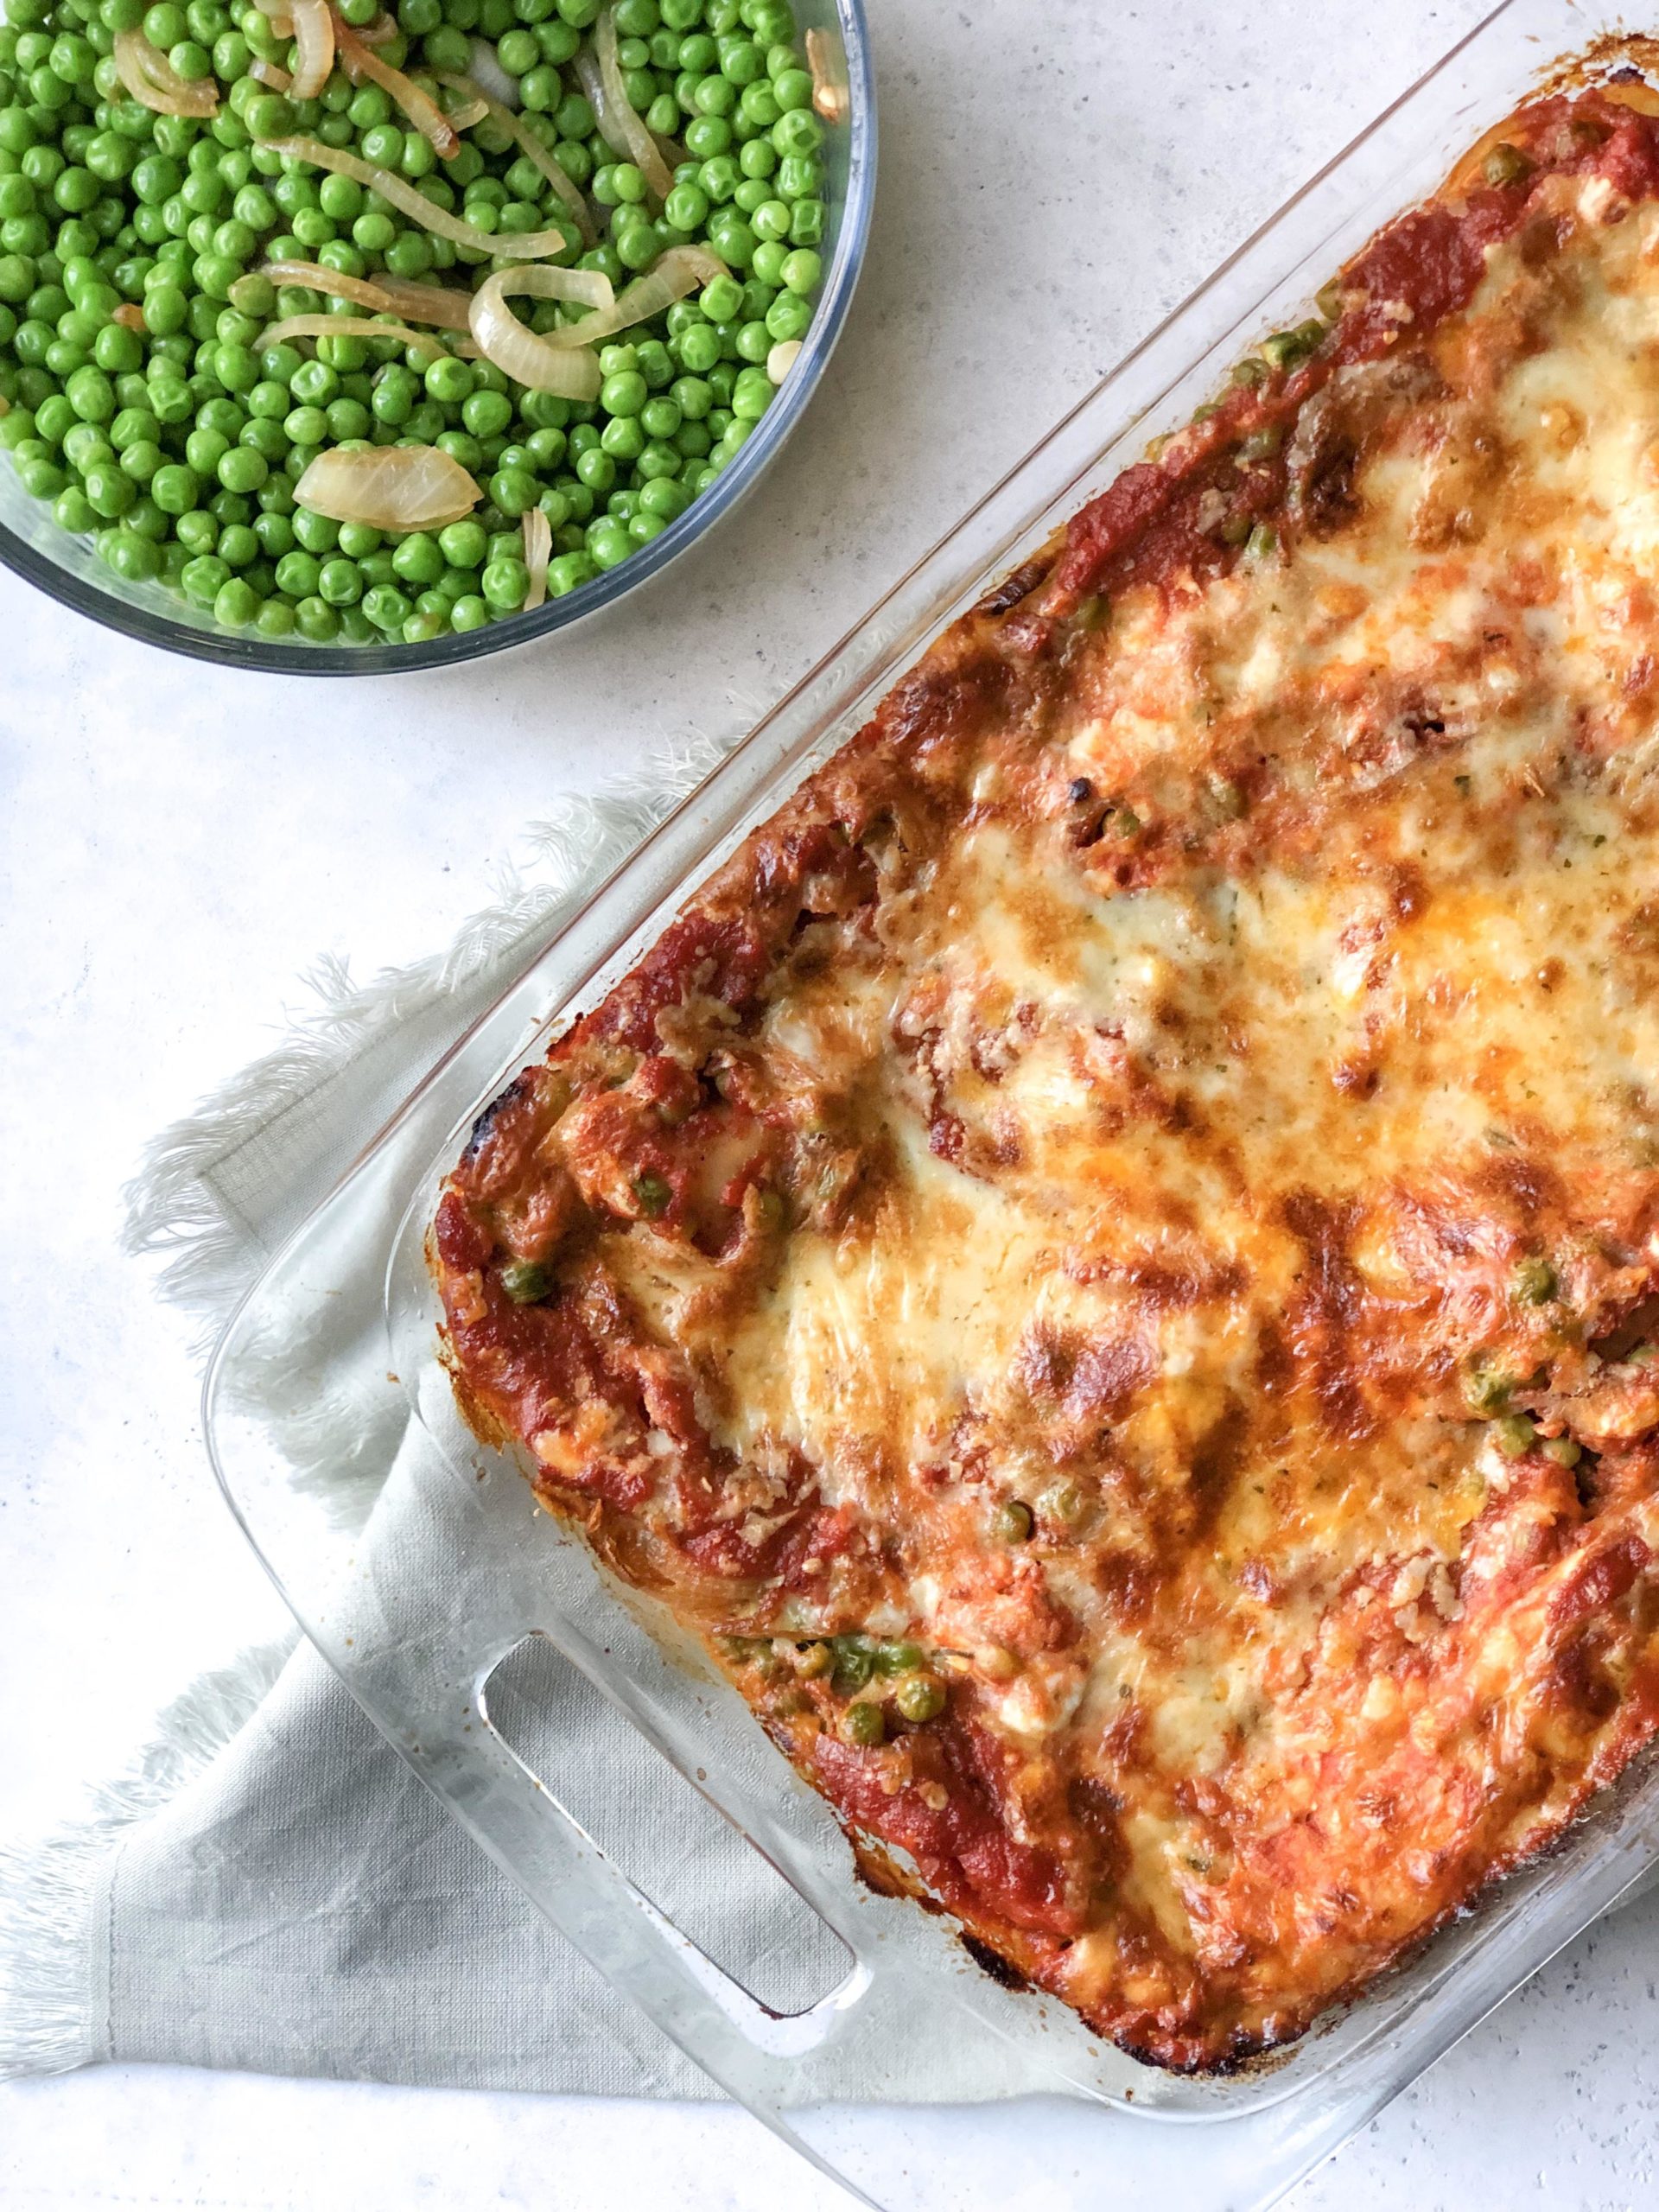 Best Recipe: How To Bake A Classic Vegetable Lasagna